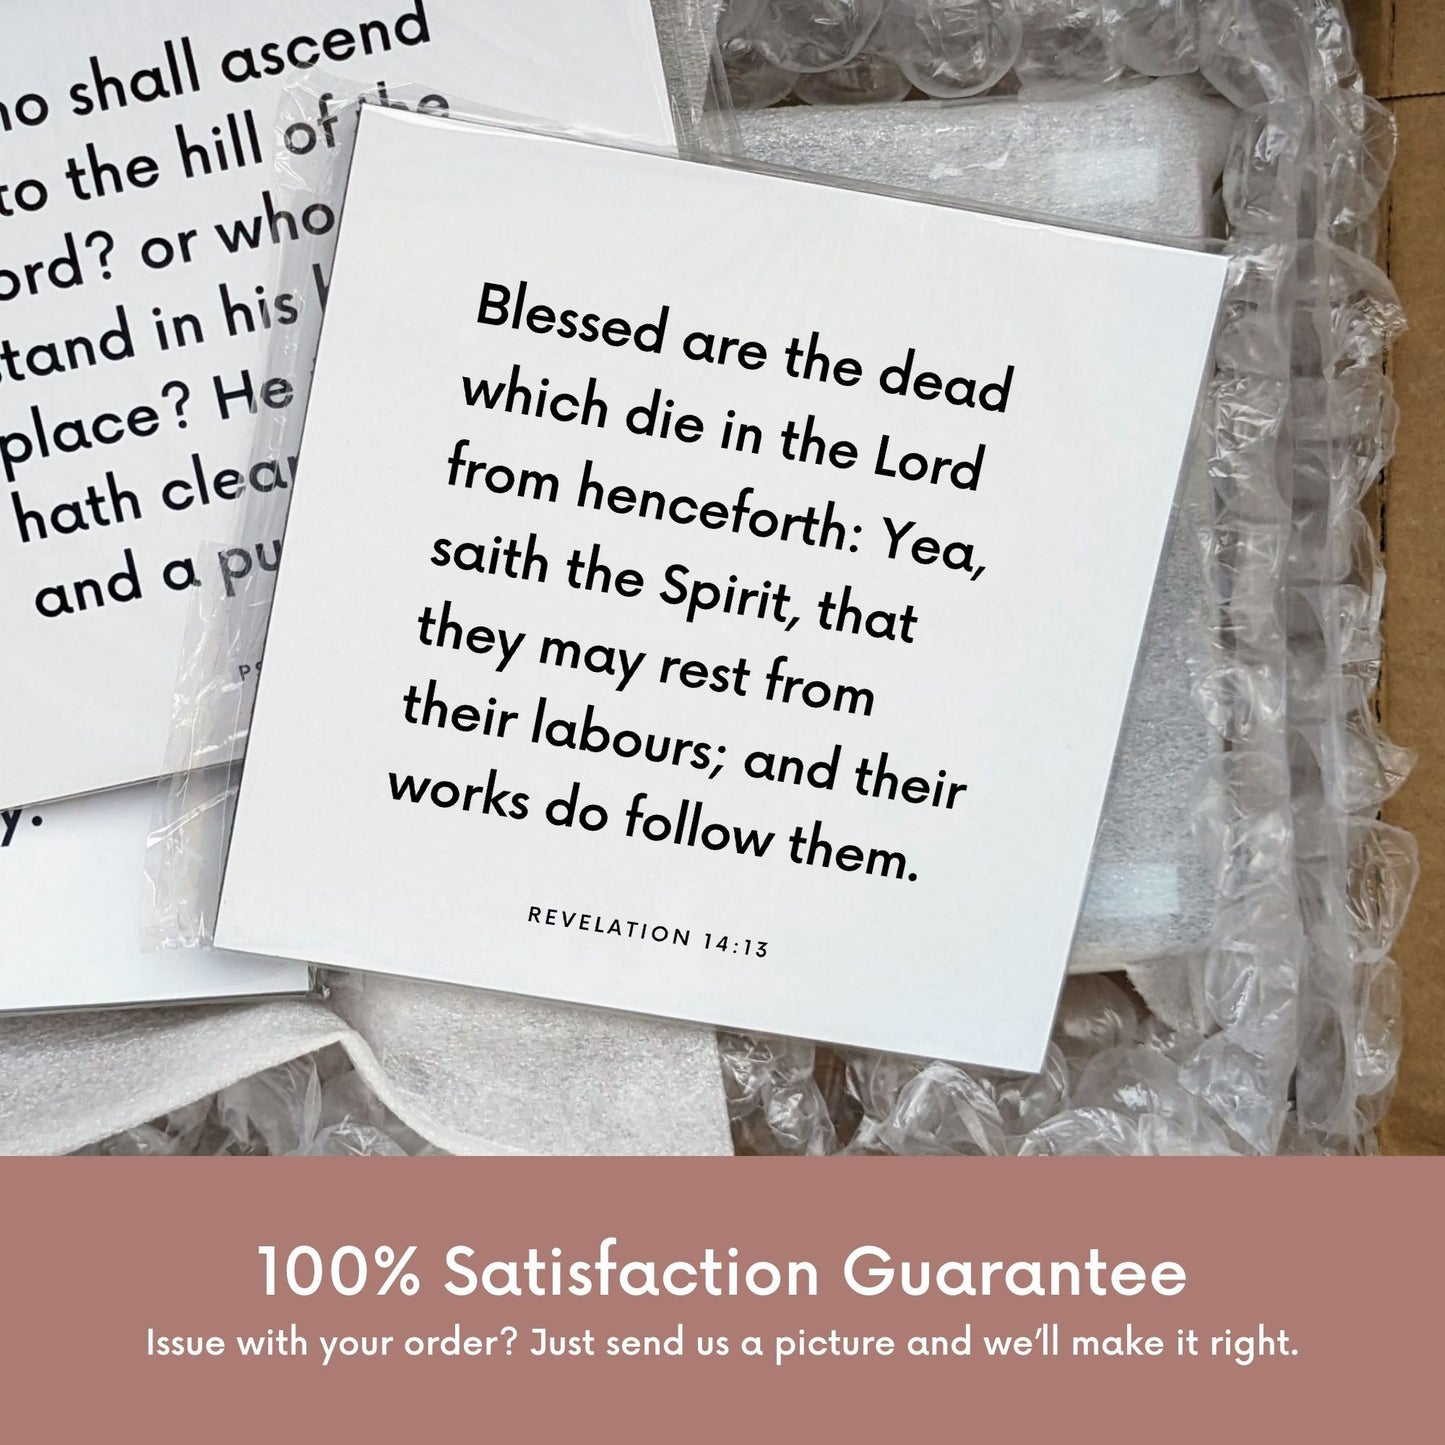 Shipping materials for scripture tile of Revelation 14:13 - "Blessed are the dead which die in the Lord"